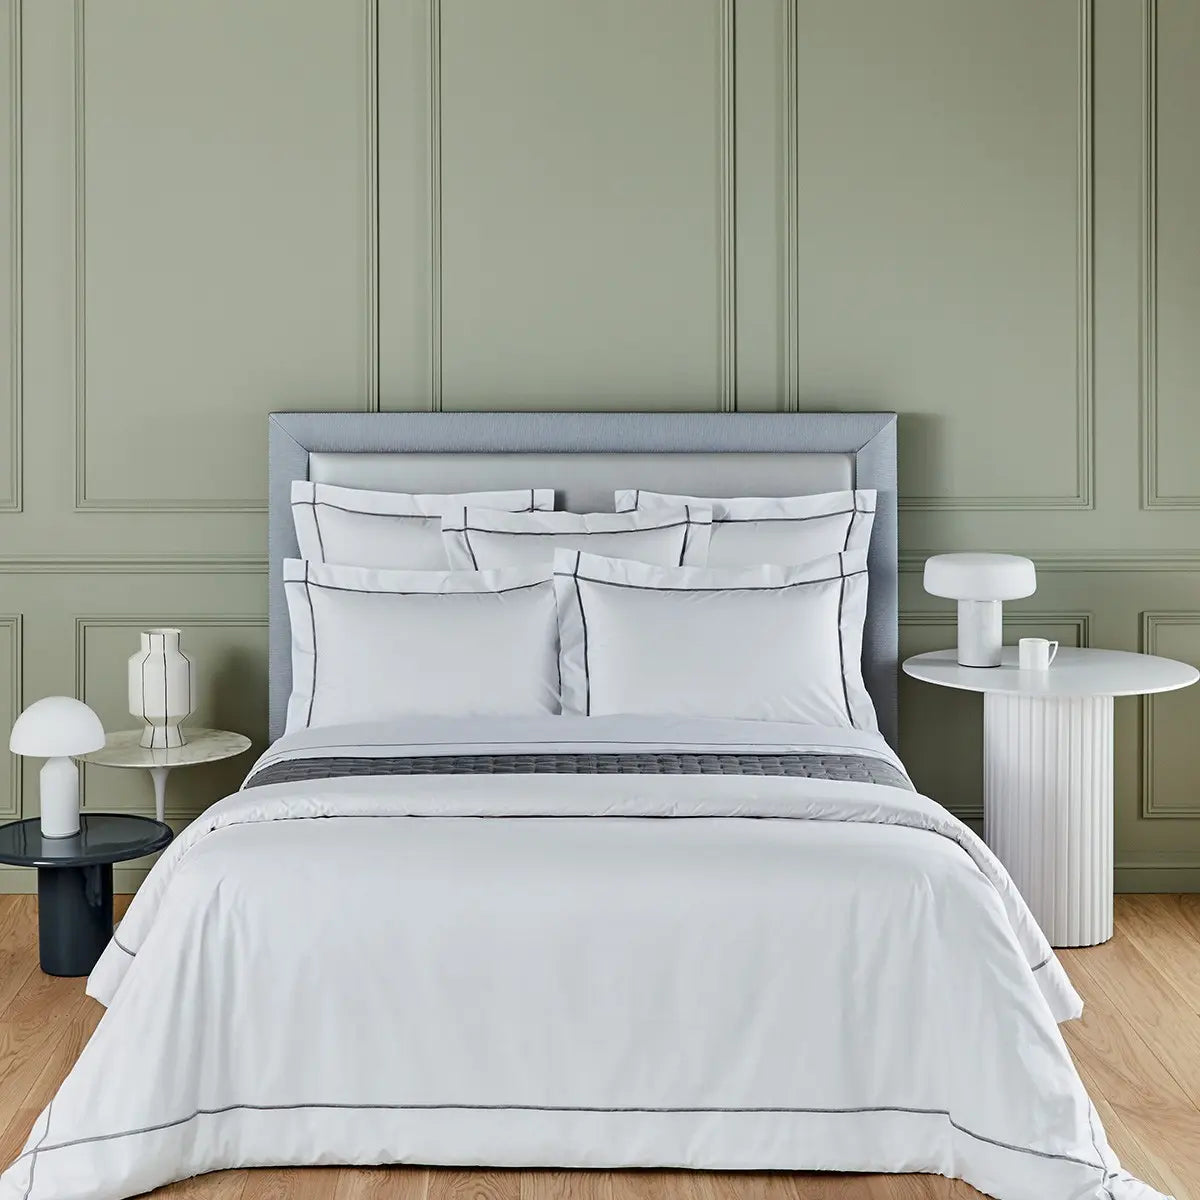 Yves Delorme Athena Bedding Collection in a room